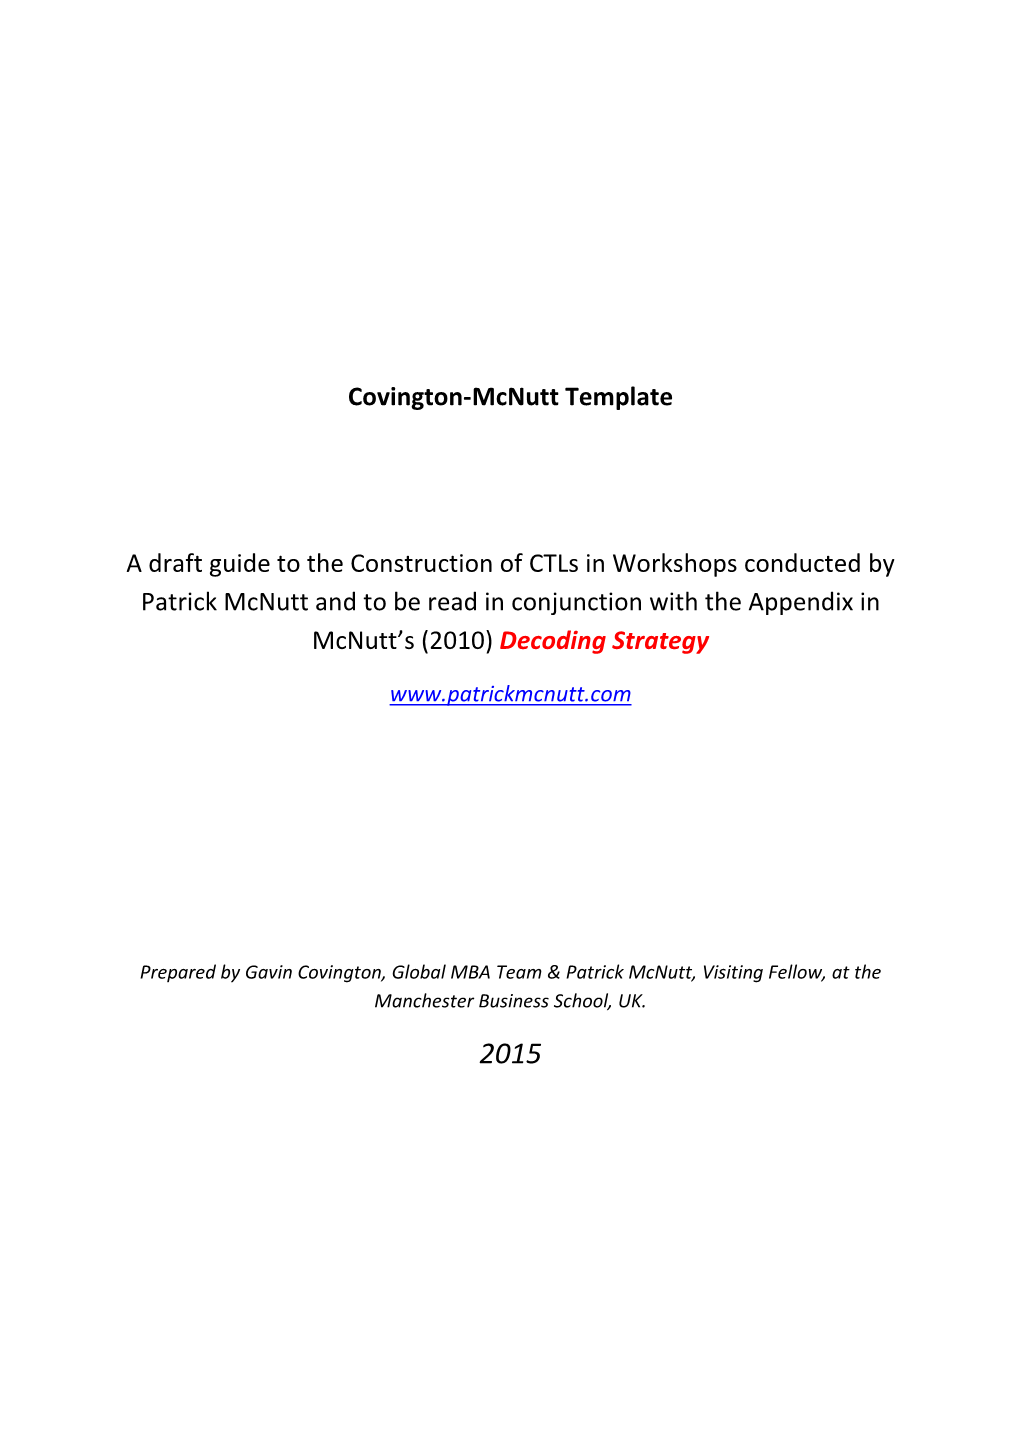 Covington-Mcnutt Template a Draft Guide to the Construction of Ctls In